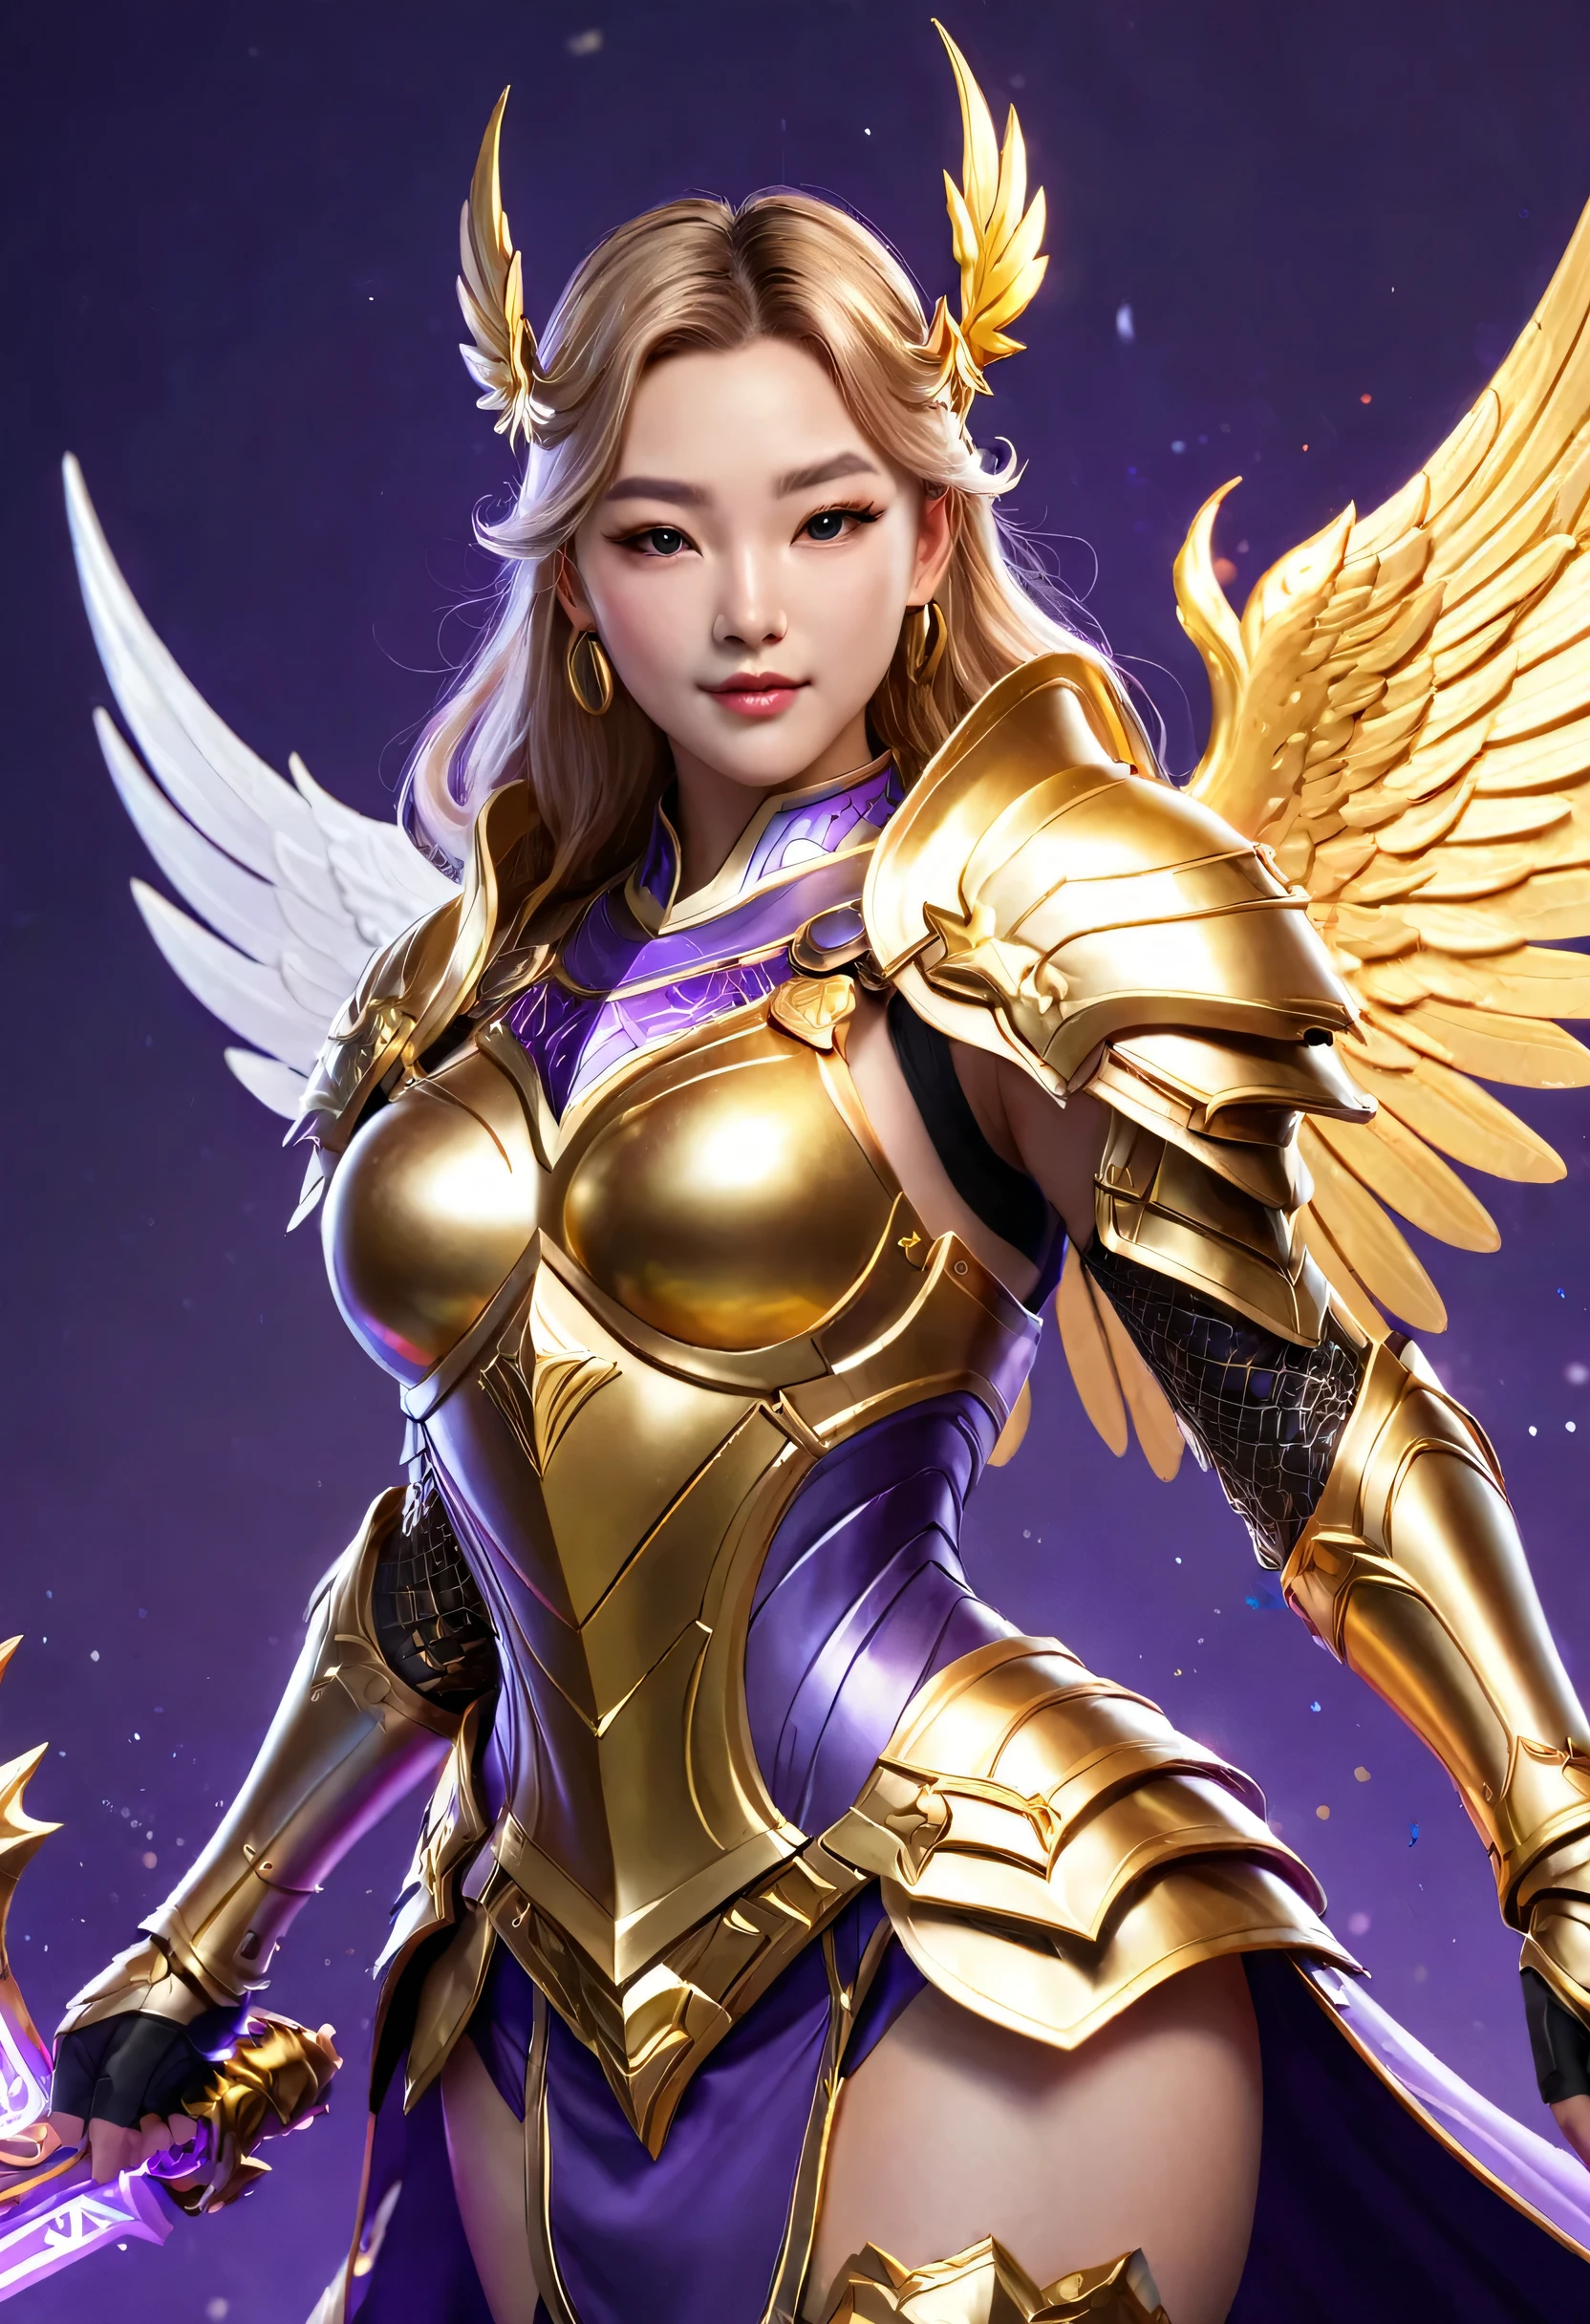 anime, a woman with a golden wings and a purple background, wear dress , inspired by Leona Wood, kda, irelia, artgerm lau, official splash art, orianna, mobile legends style, style artgerm, extremely detailed artgerm, brigitte, freya, portrait knights of zodiac girl, with full armor , ig model | artgerm